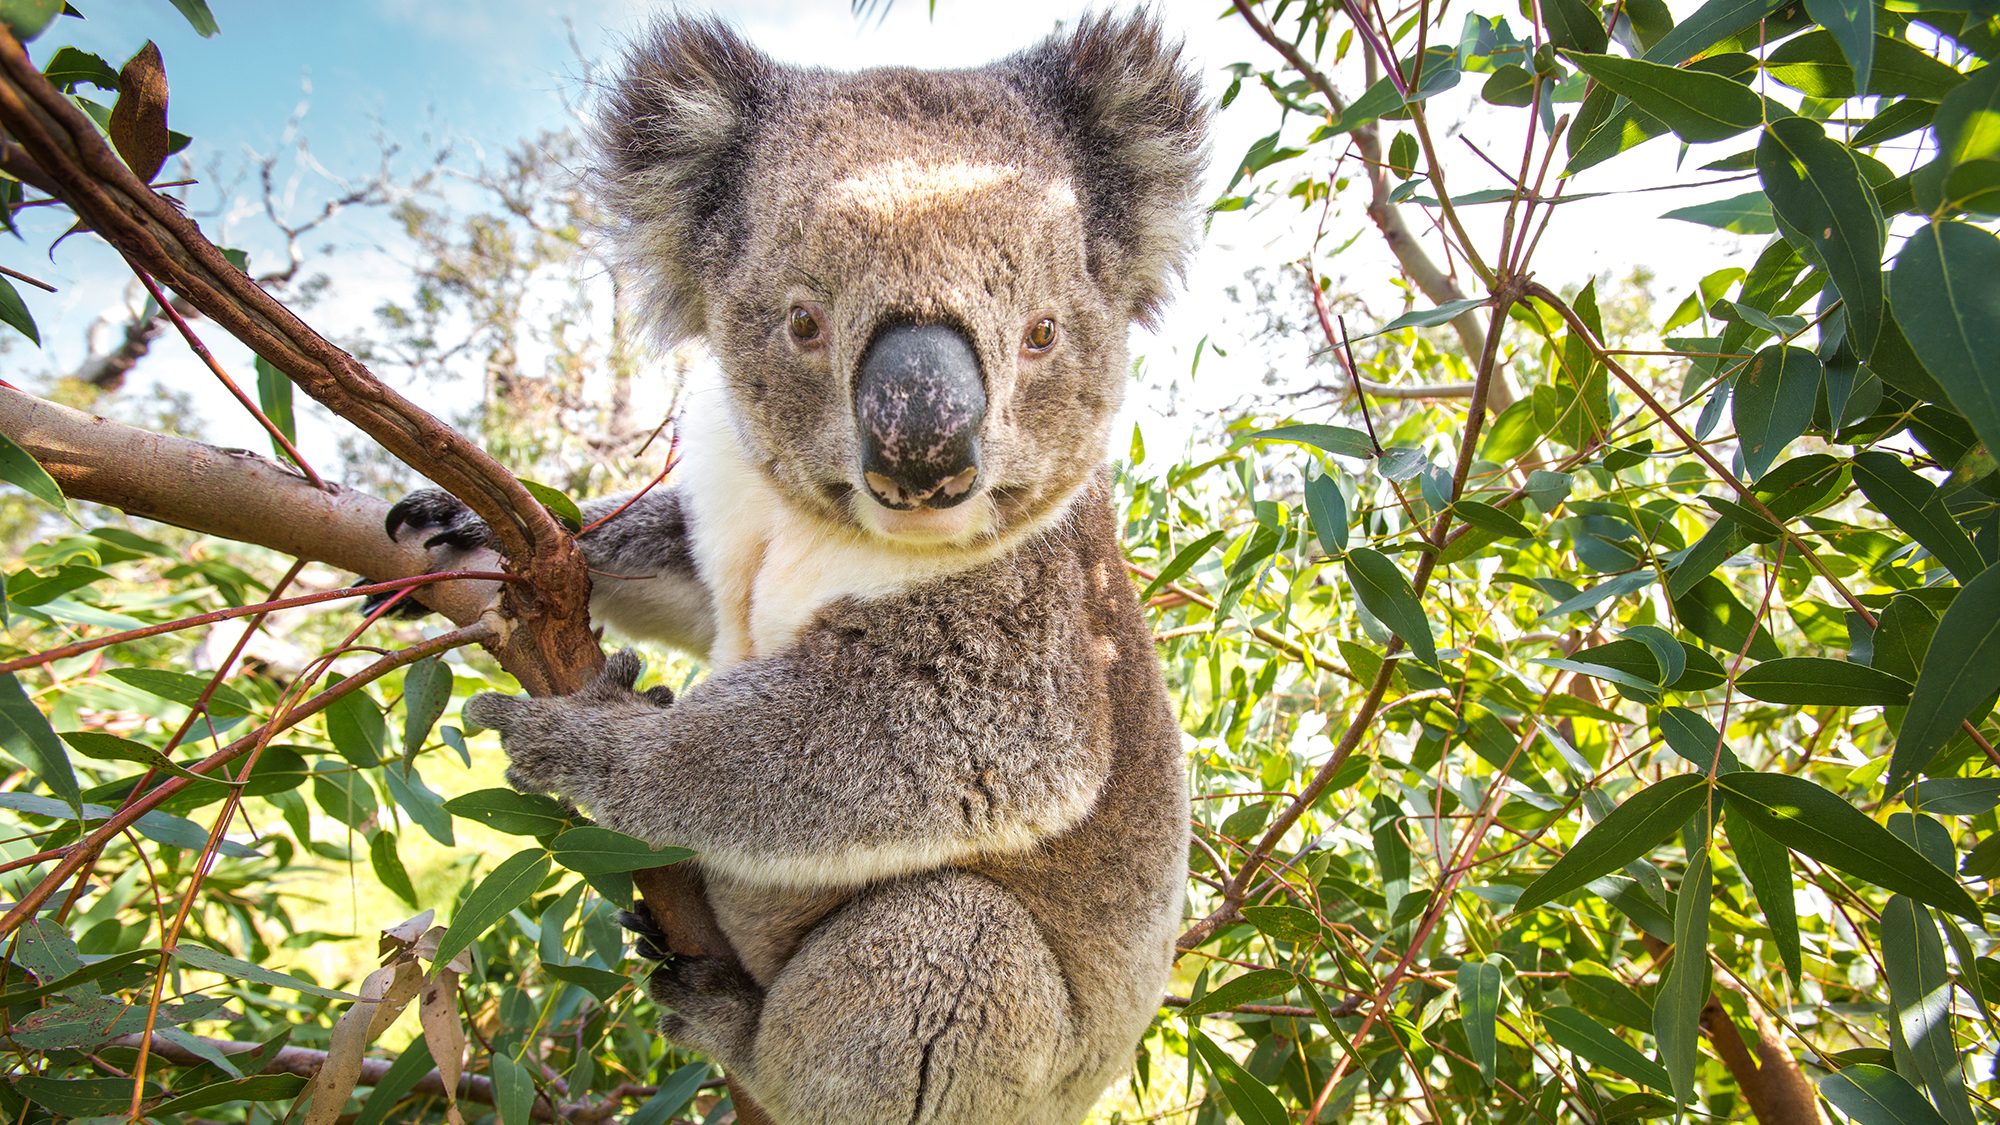 Climate Change Is Forcing Koalas to Leave Trees to Find Water, Researchers Say